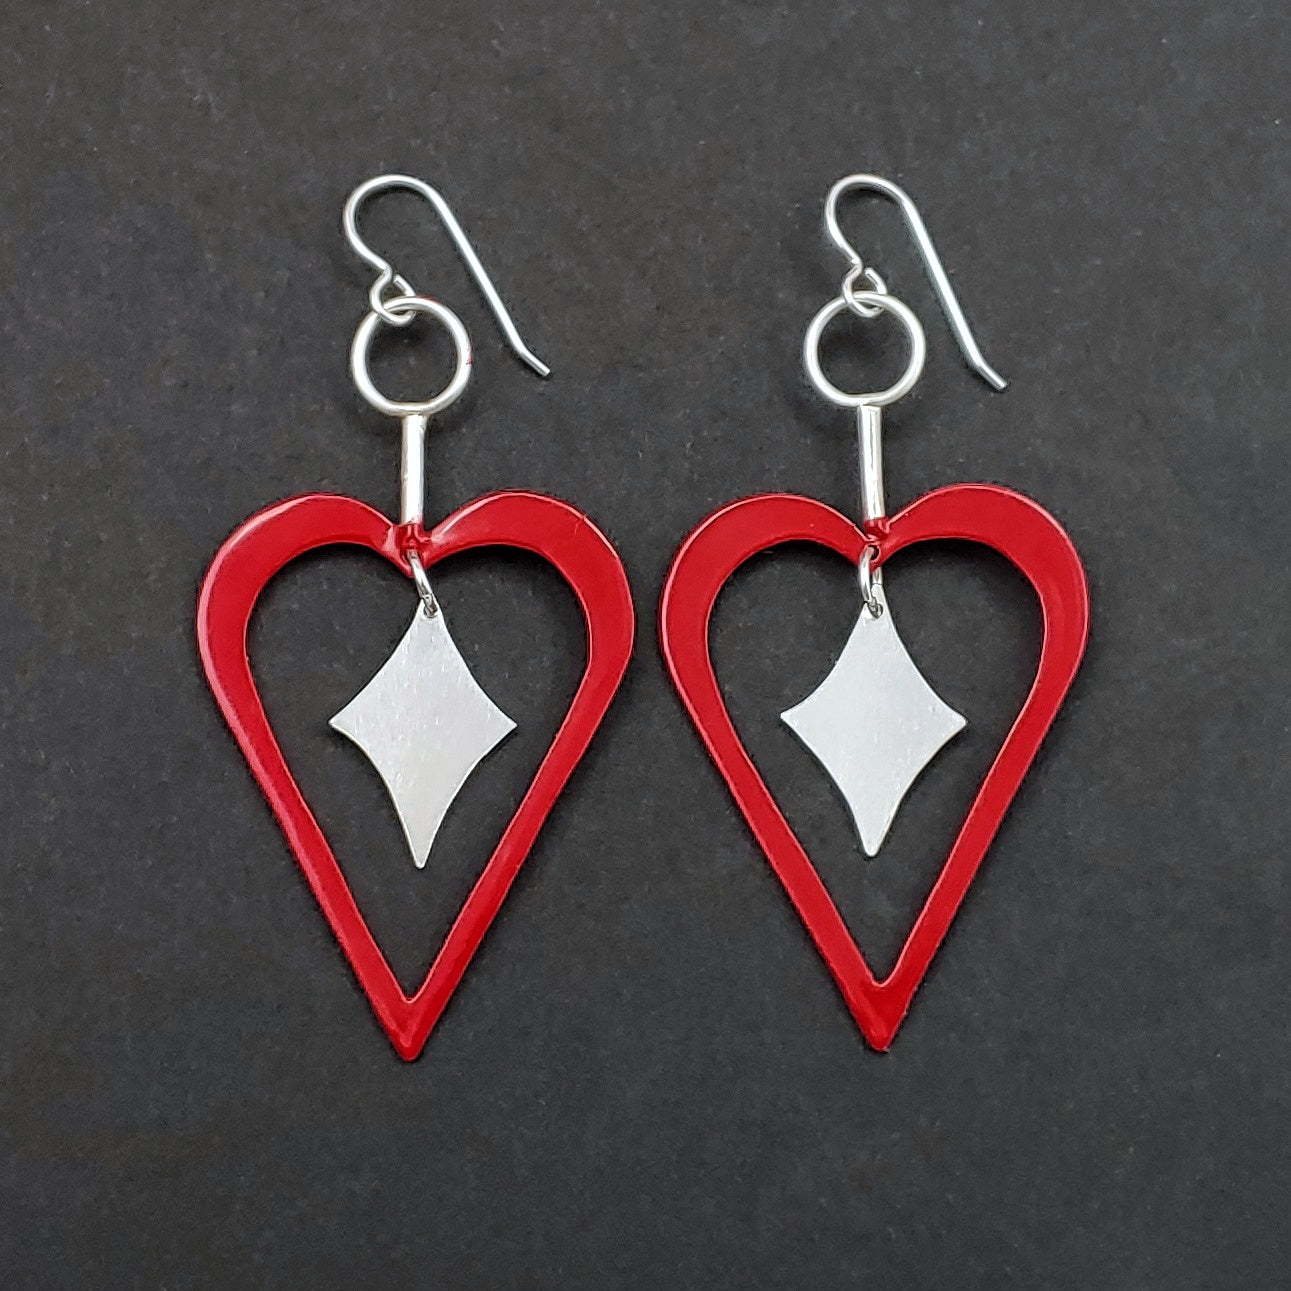 Red heart shaped earrings with sterling silver retro diamonds in the middle